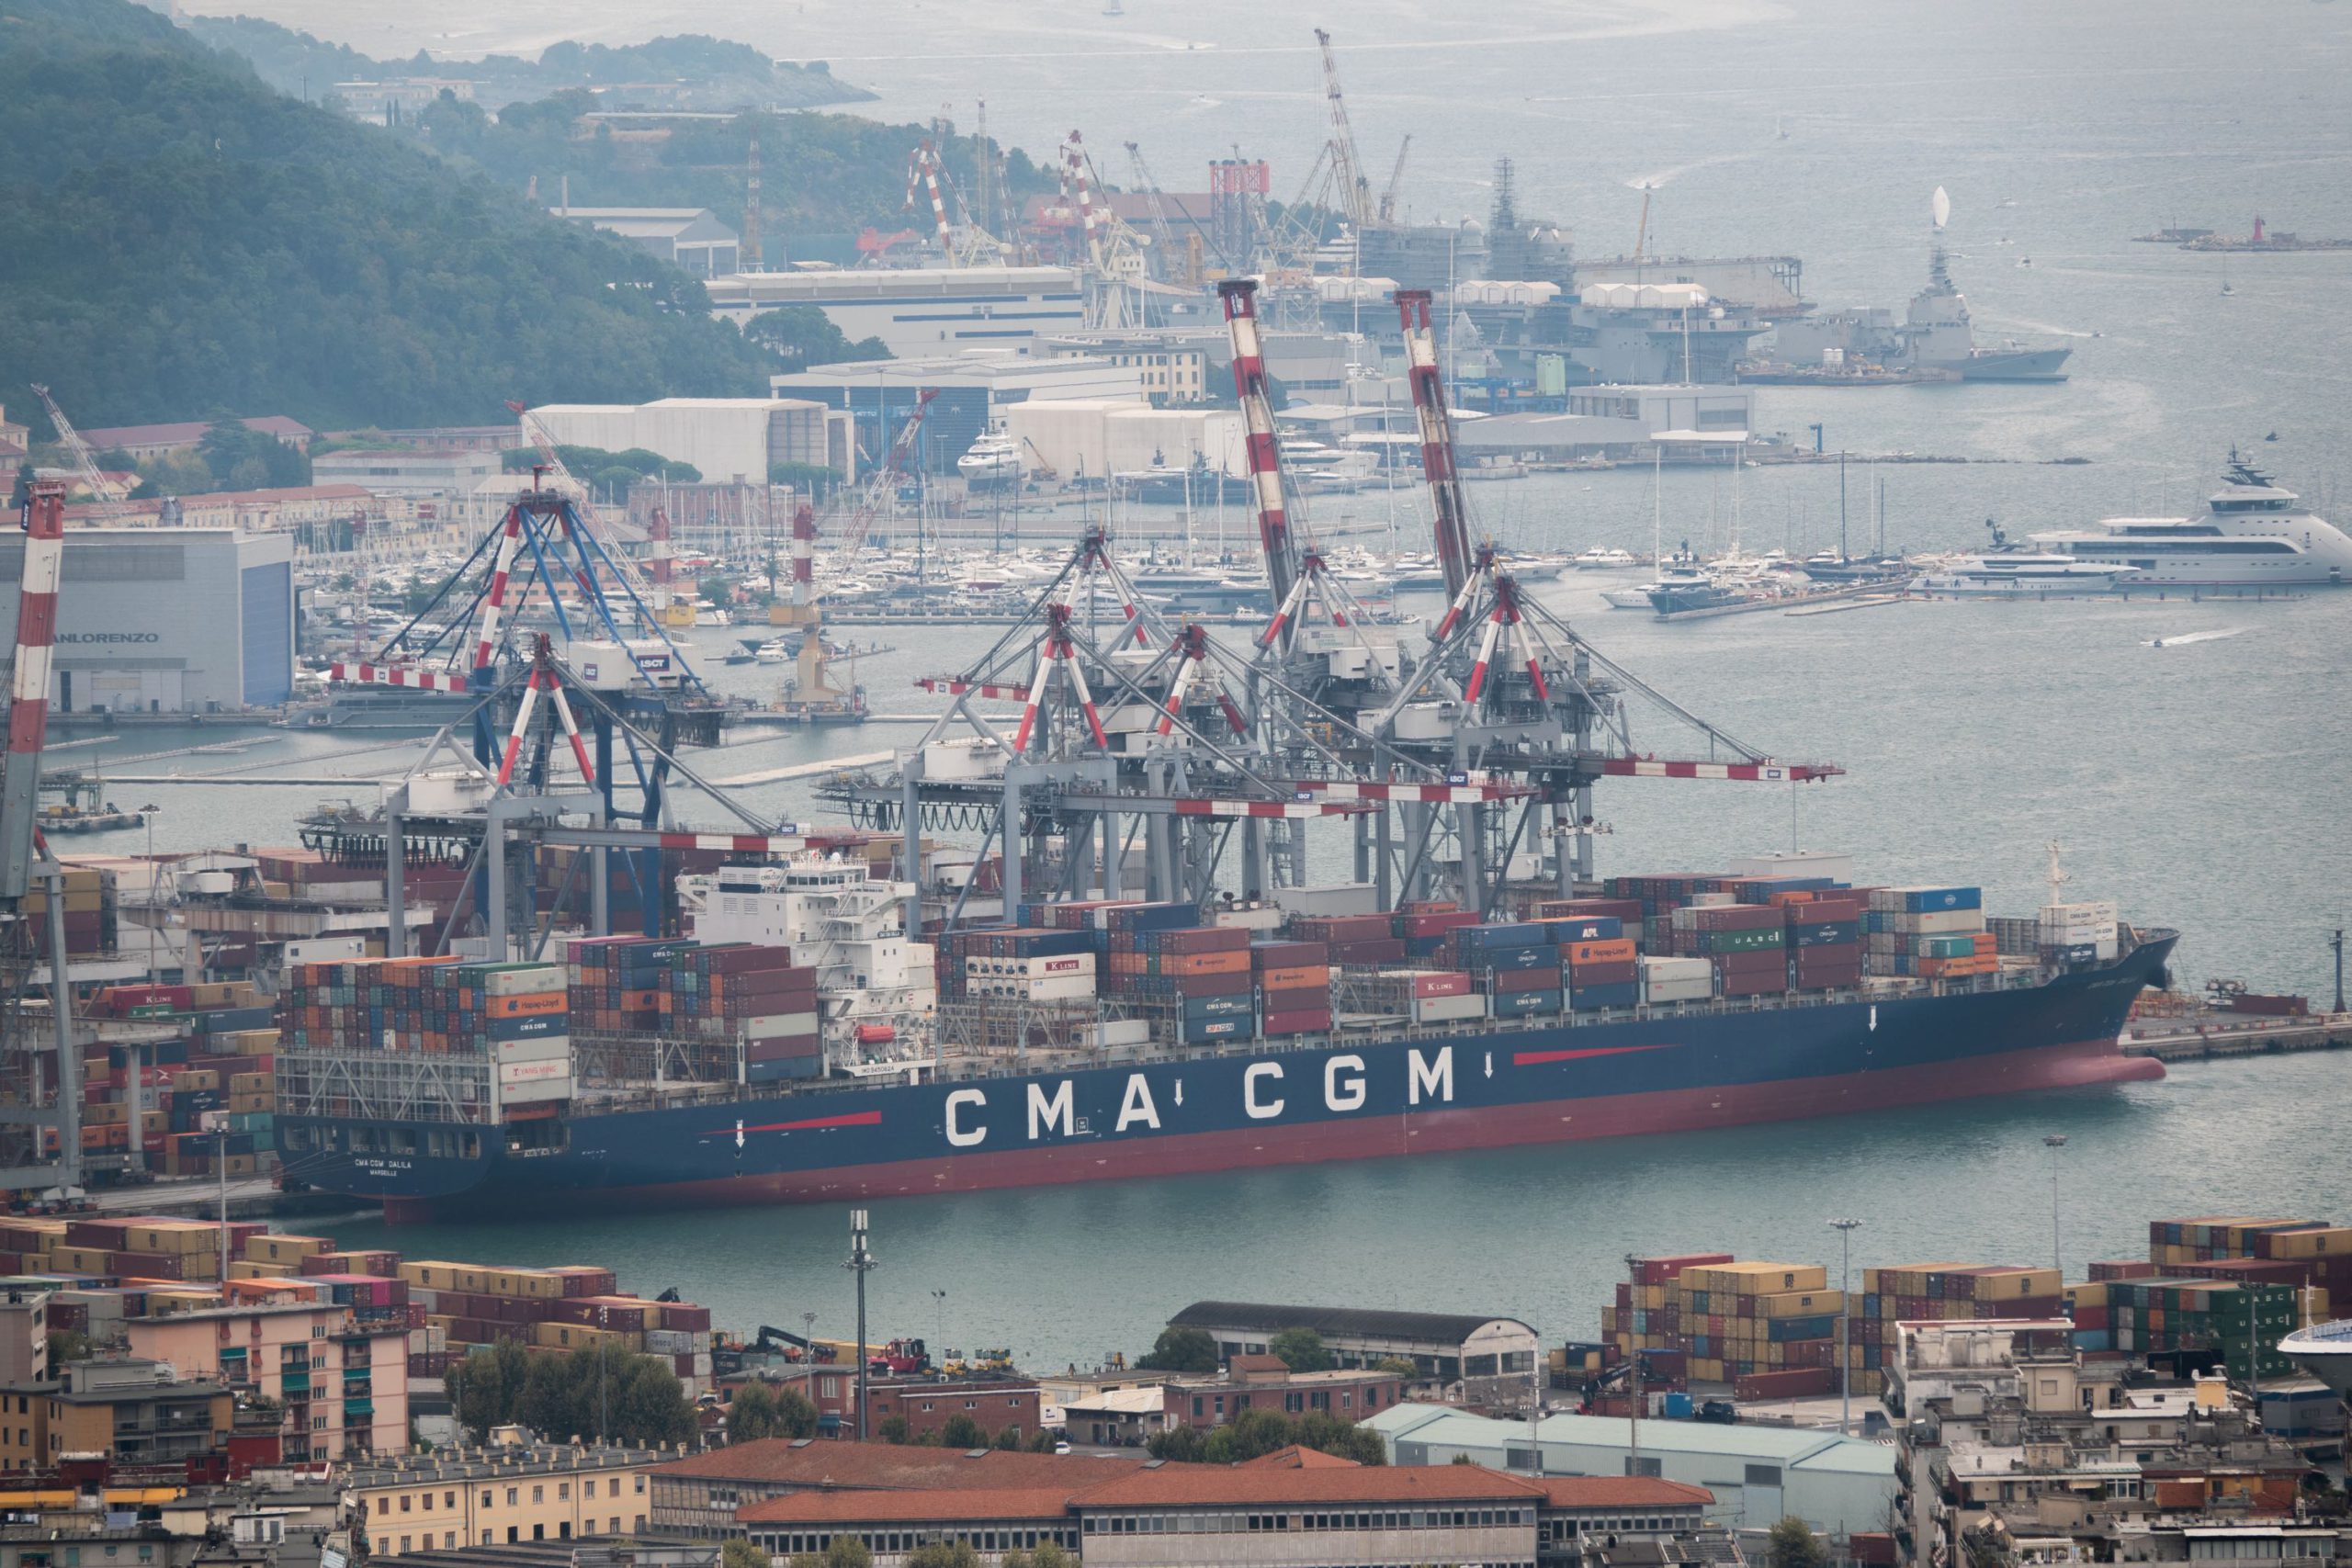 CMA CGM Dalila made her debut at LSCT in September 2020